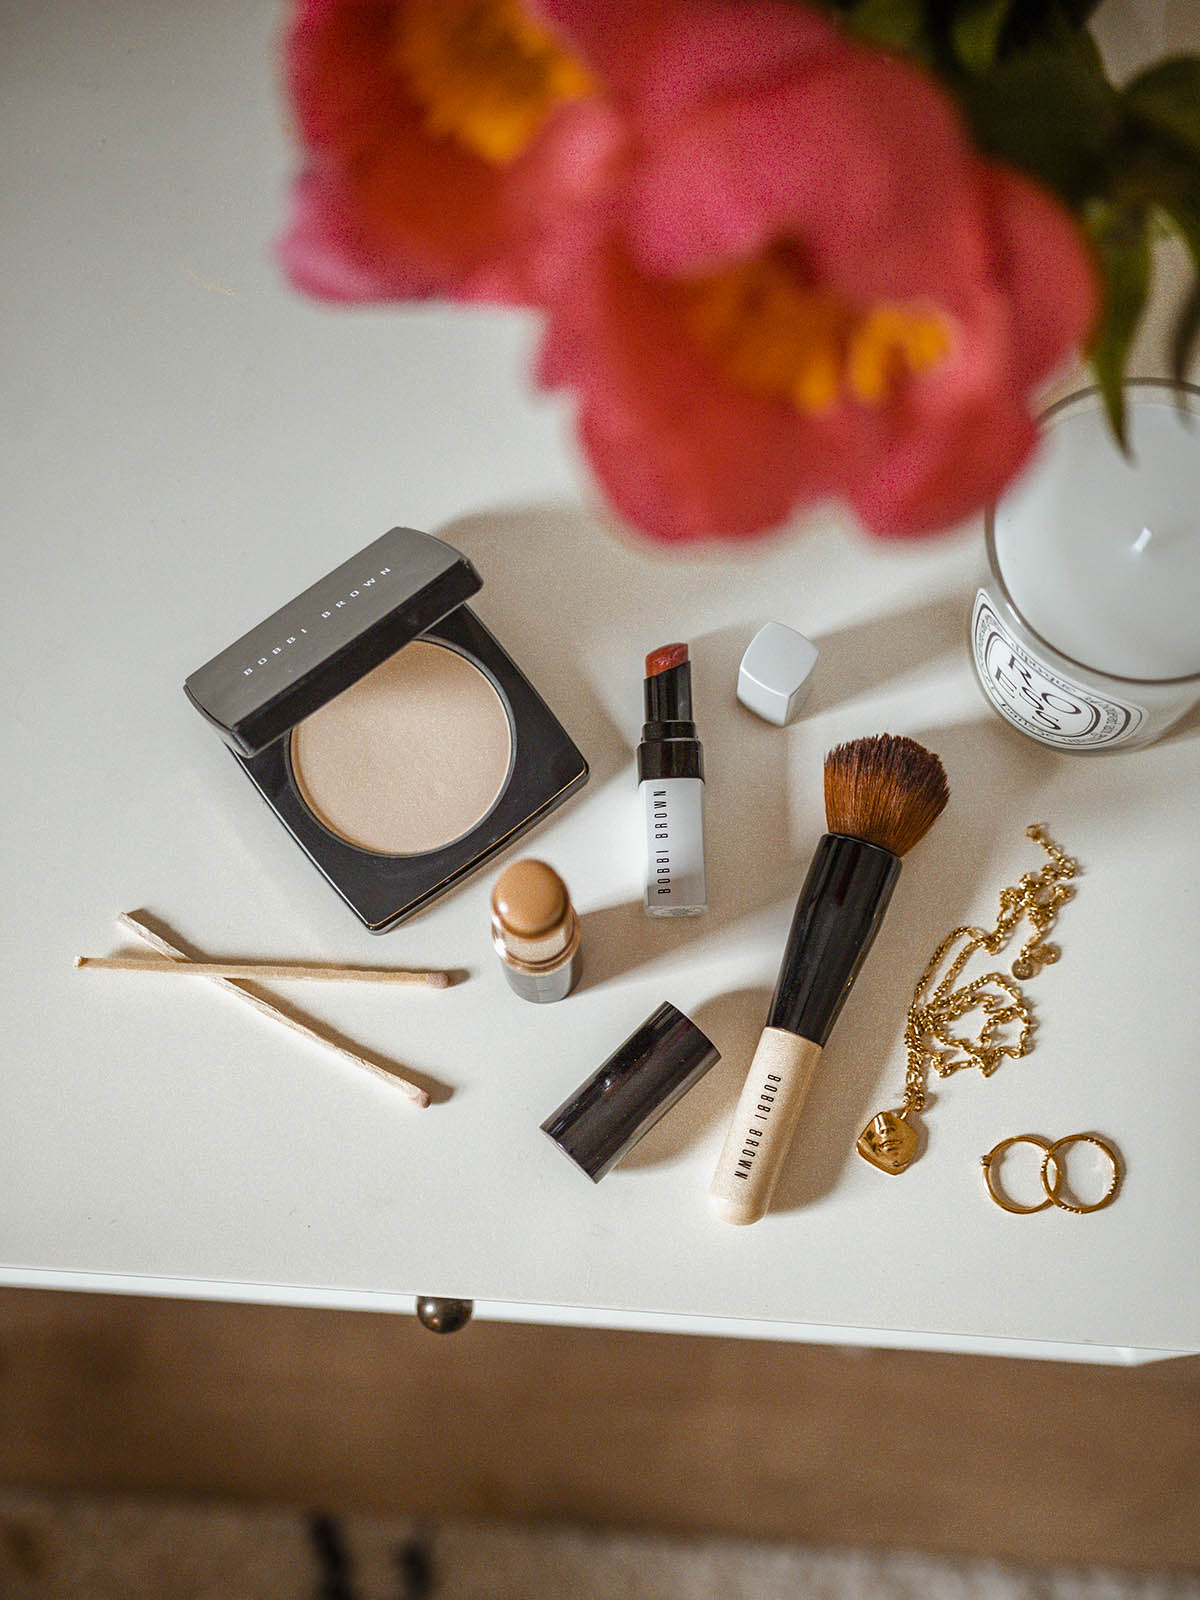 A Five Minute Spring Look With Bobbi Brown.